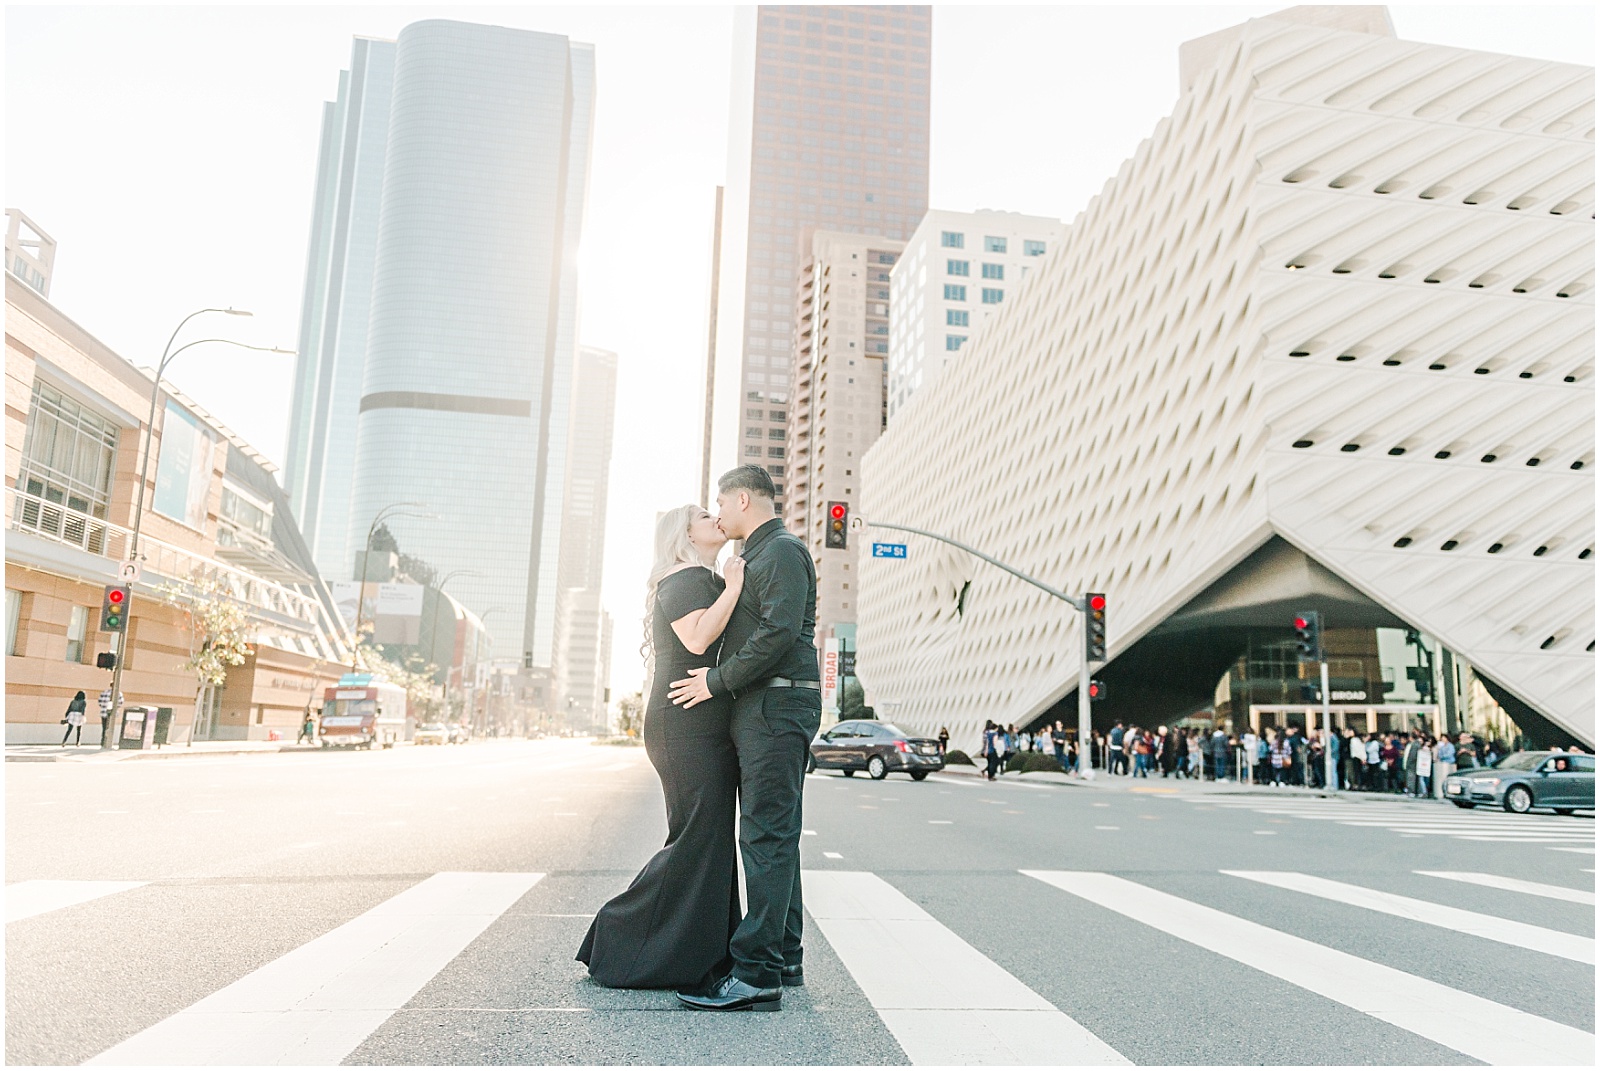 Disney Concert Hall Engagement Session by Mollie Jane Photography.  To see more go to www.molliejanephotography.com